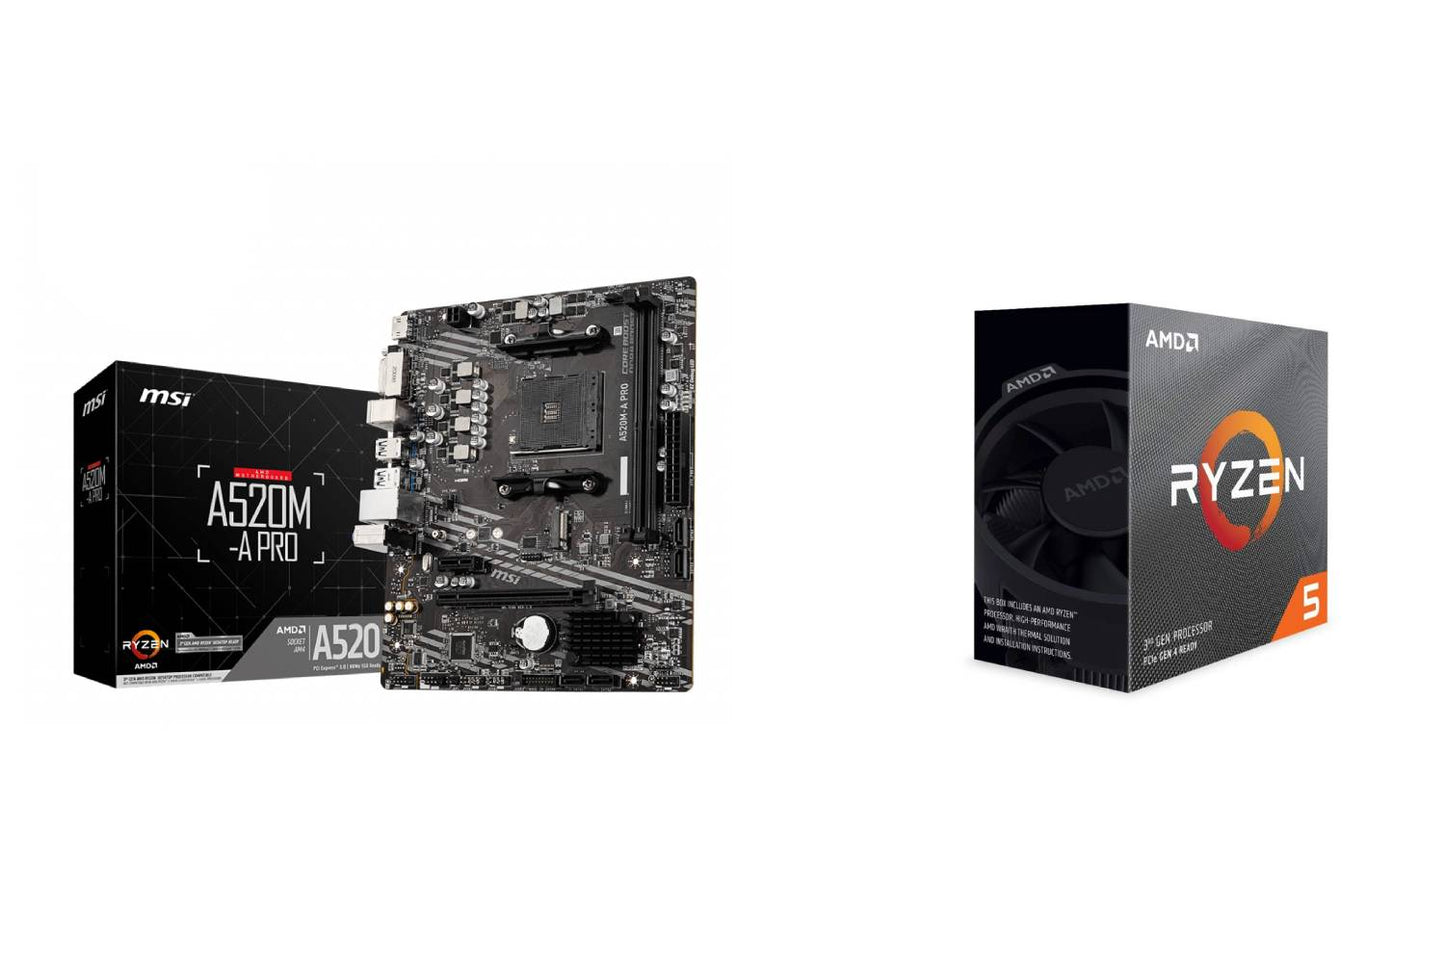 AMD Ryzen 5 3500X + MSI A520M-A PRO Gaming Motherboard Combo kit